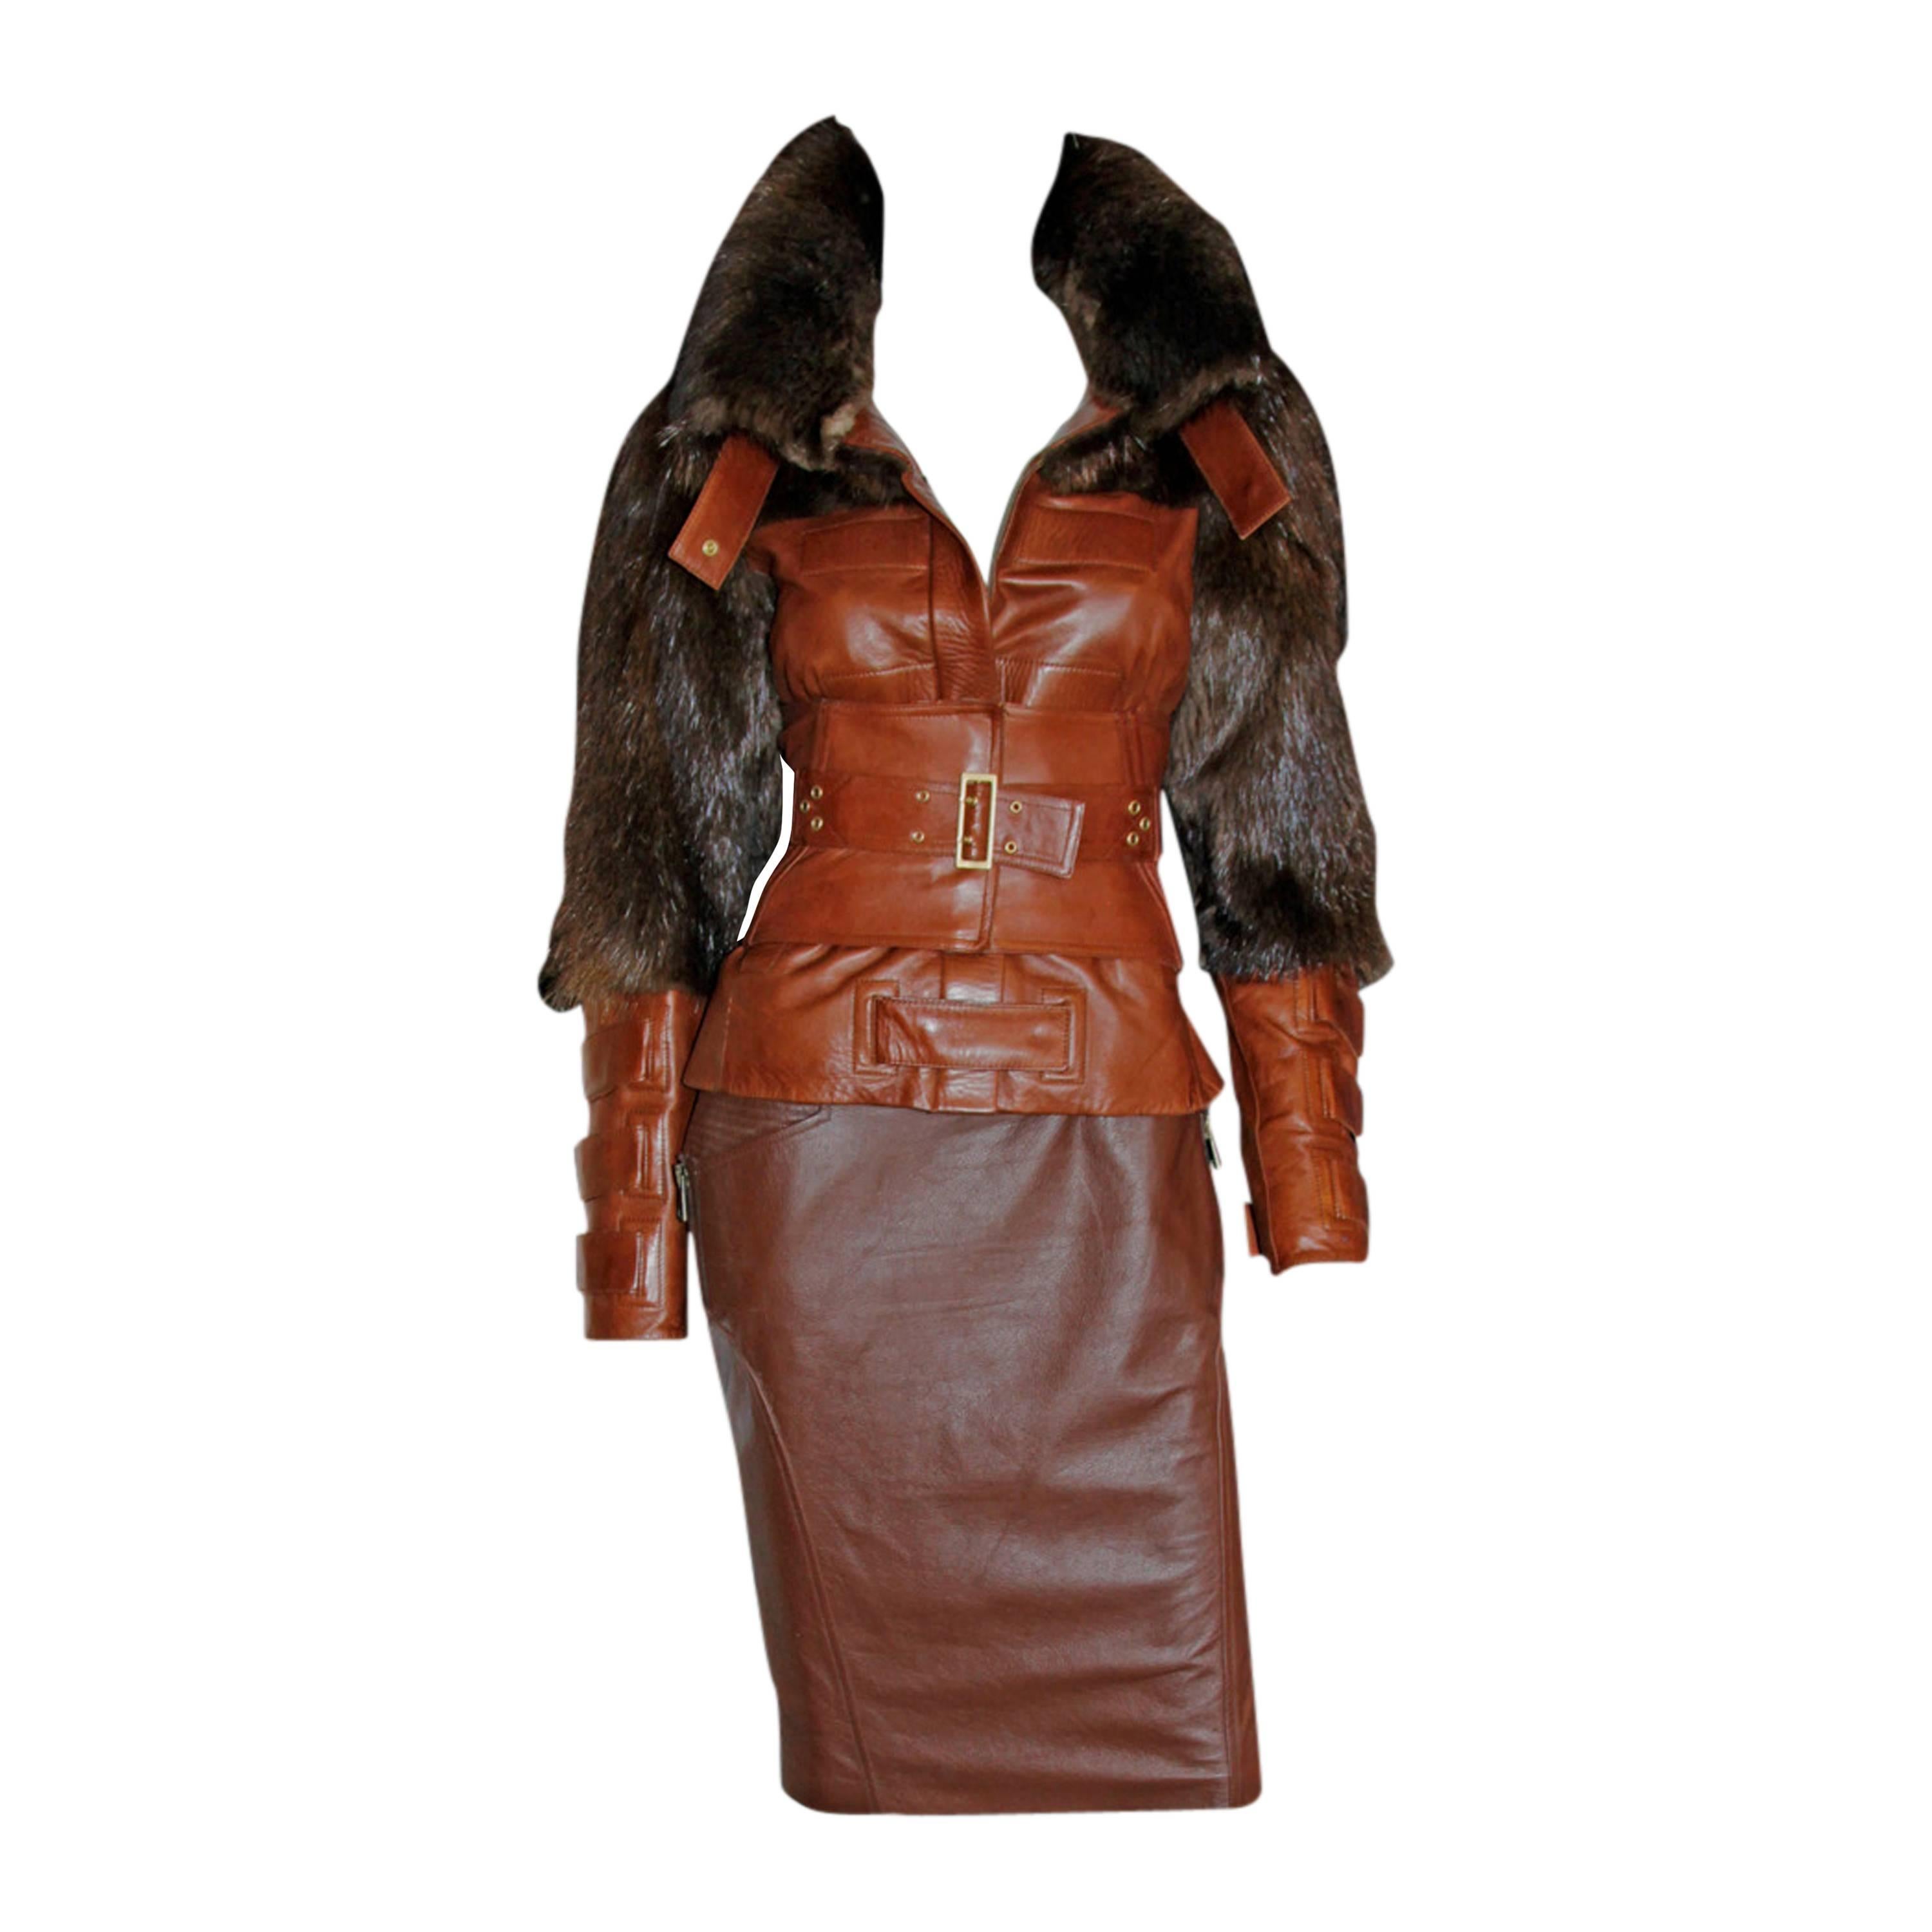 Uber Rare Tom Ford Gucci FW03 Brown Leather Fur Corseted Jacket & Matching Skirt